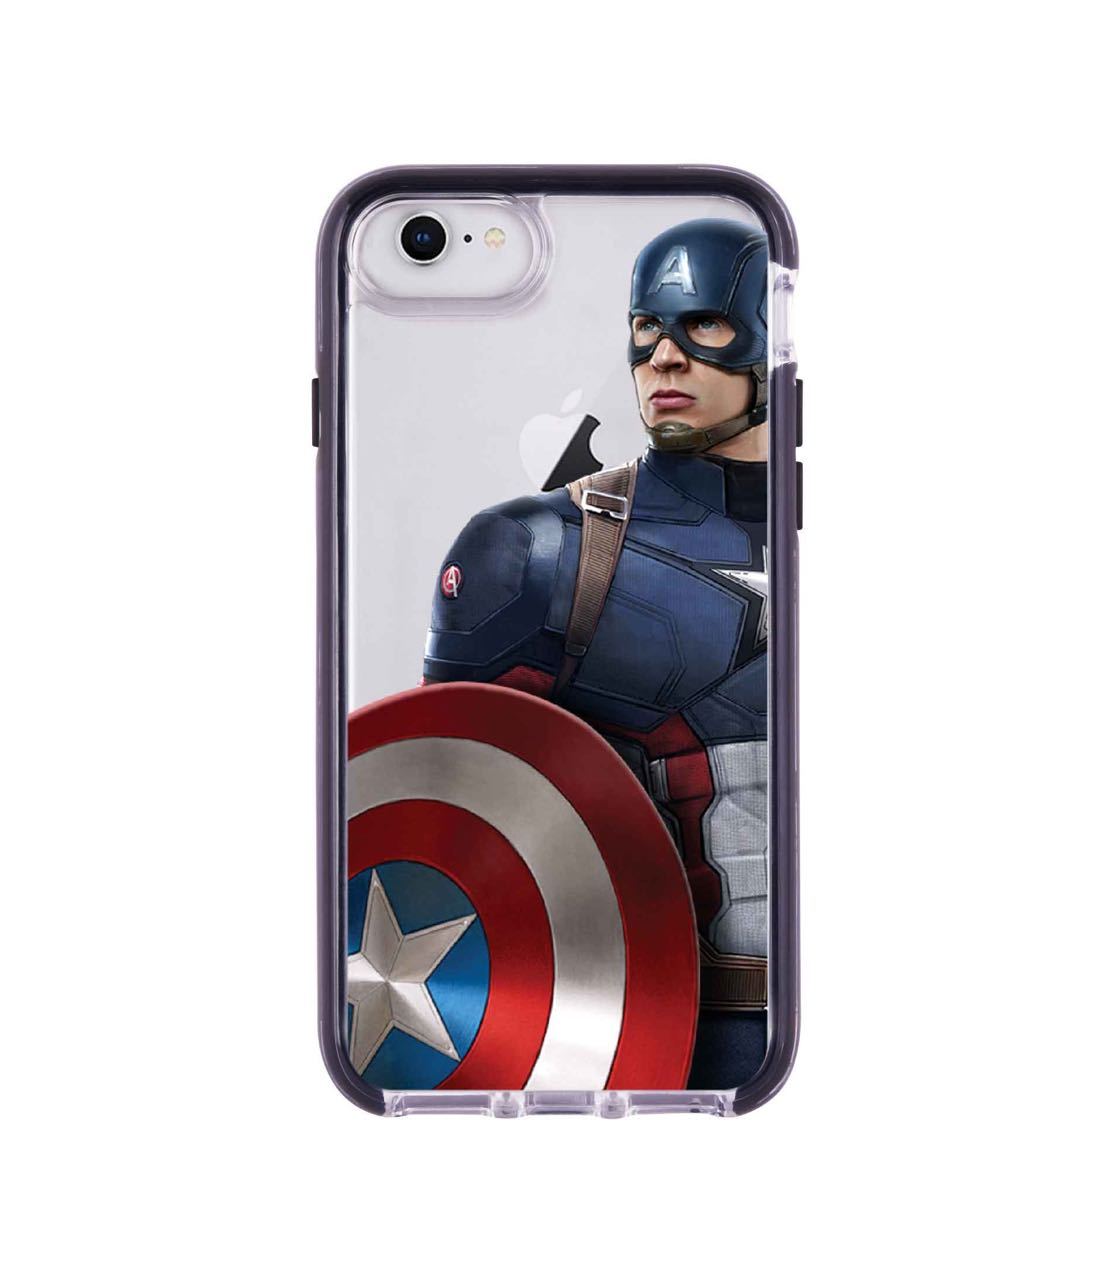 Team Blue Captain - Extreme Phone Case for iPhone 8